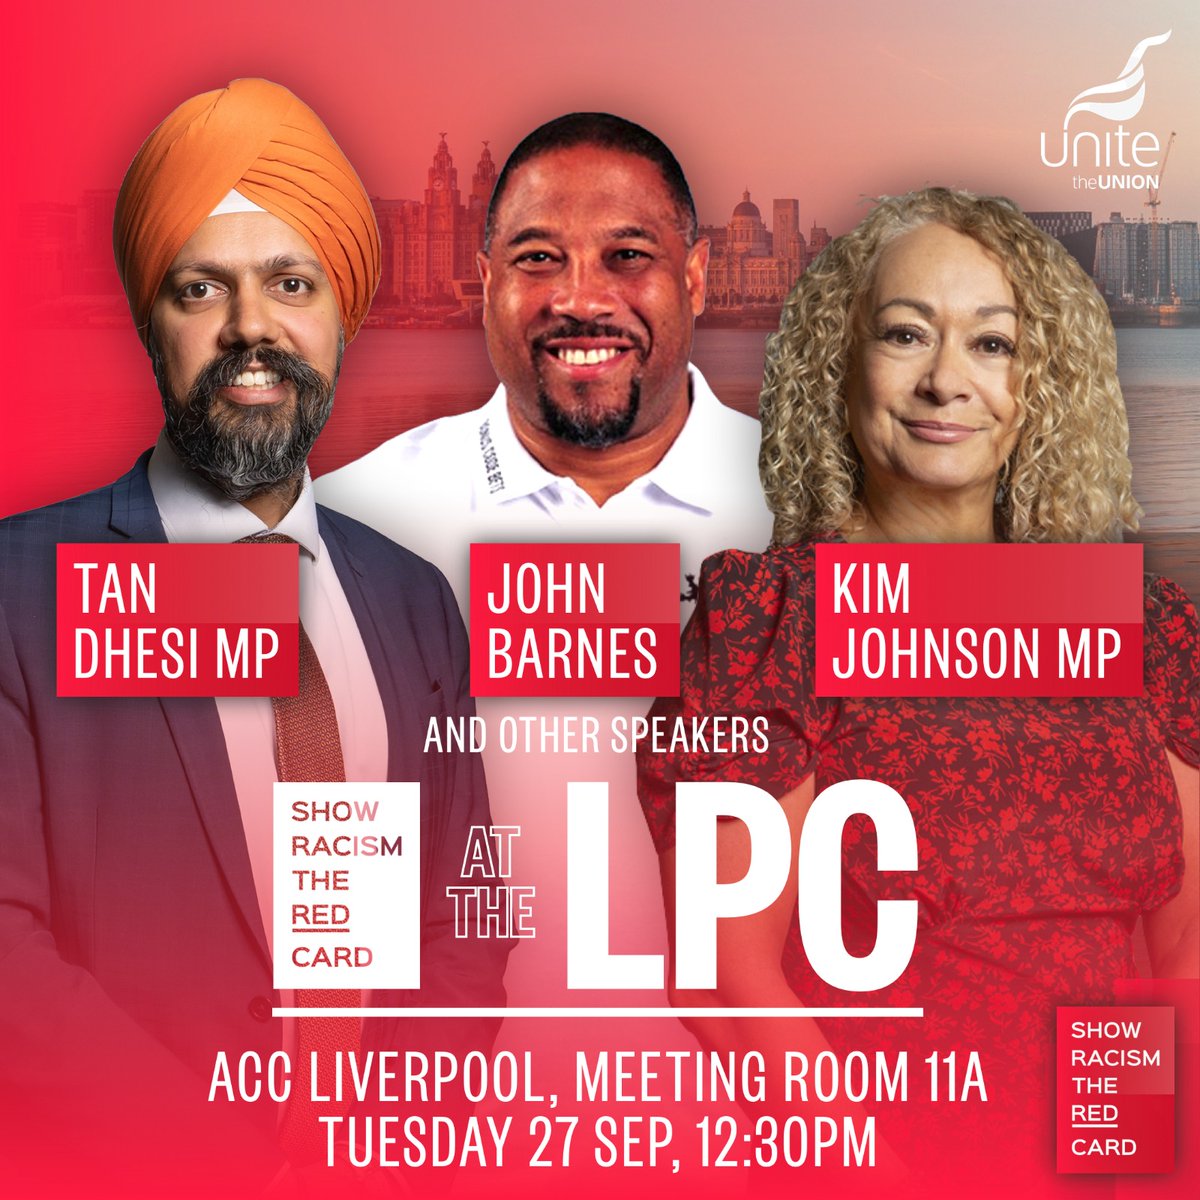 #ShowRacismtheRedCard have a great lineup of speakers for our #LabourConference2022 meeting this Tuesday: @TanDhesi @KimJohnsonMP @officialbarnesy. #Liverpool